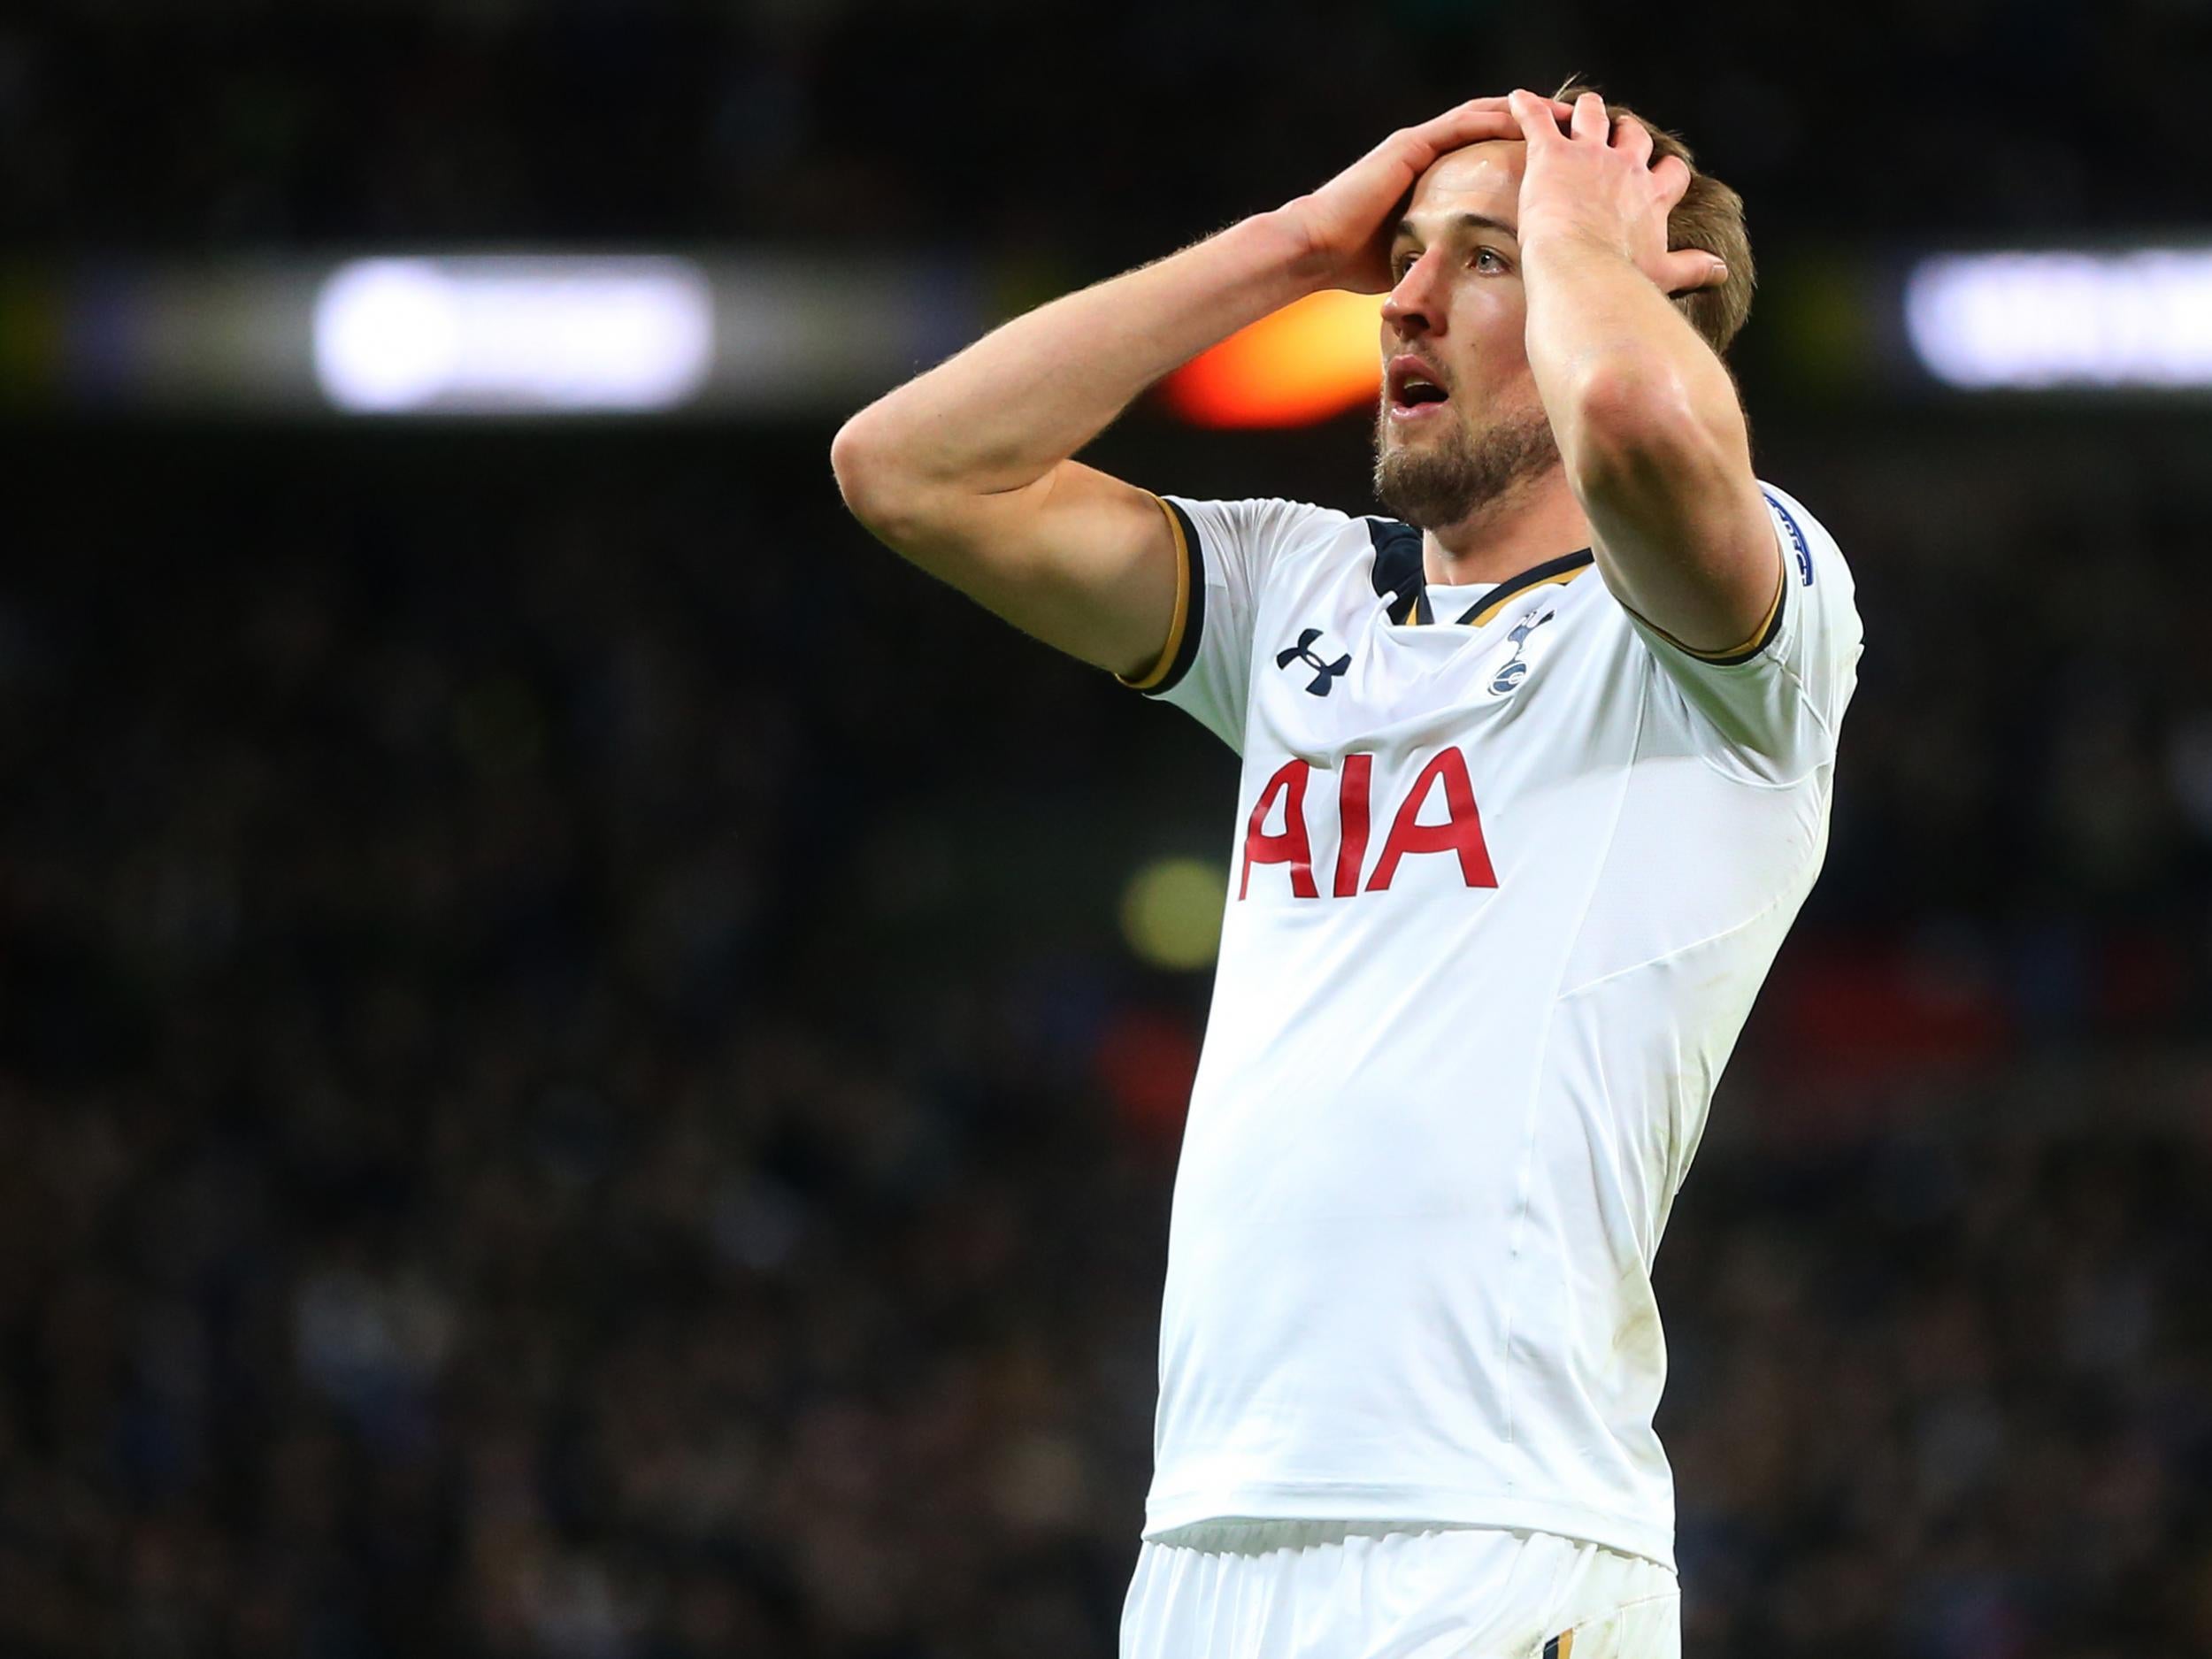 Kane was impressed with the level of fight his team-mates showed